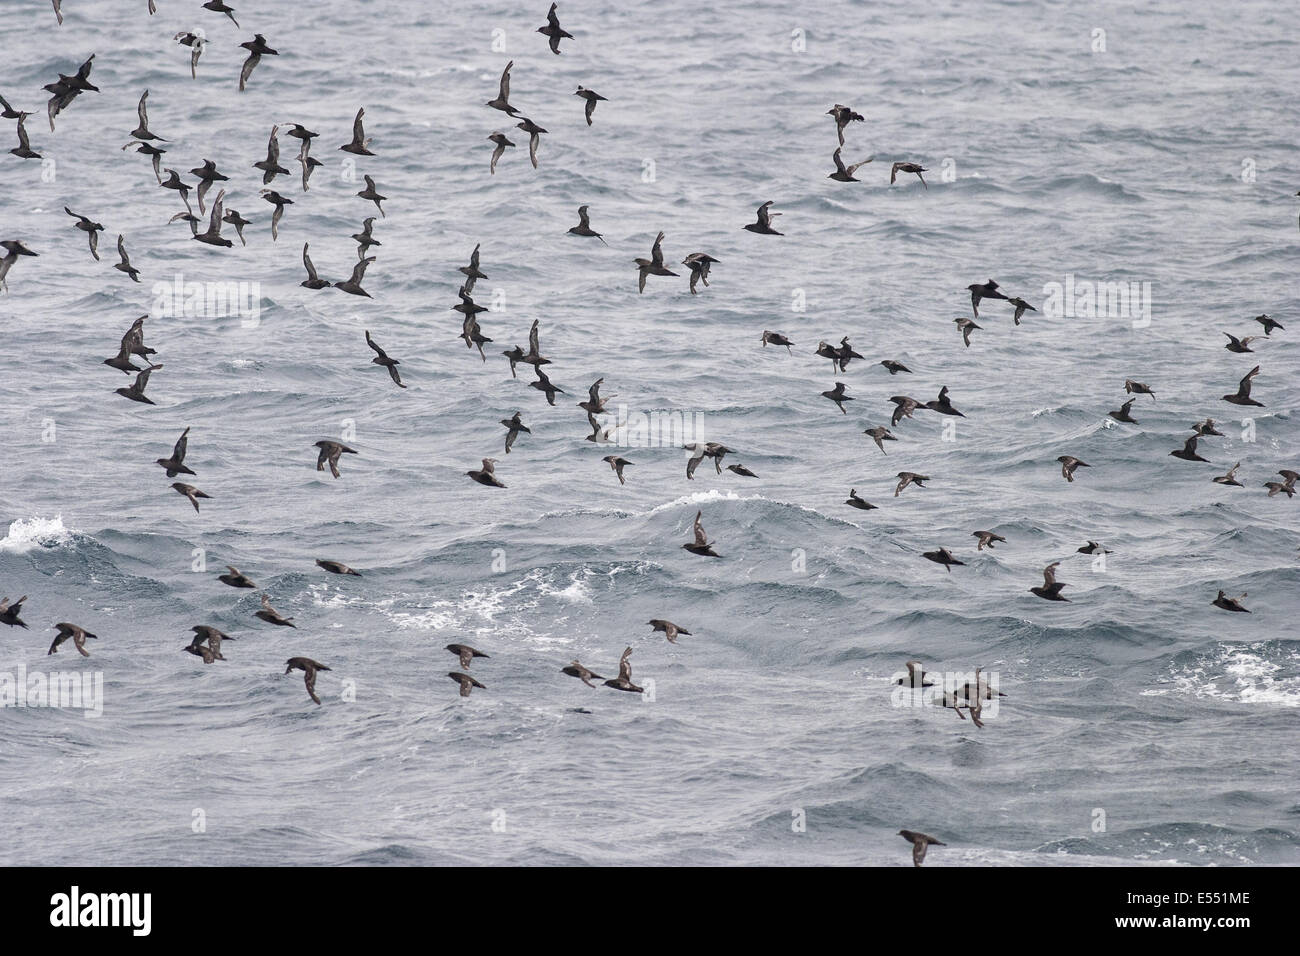 Short-tailed Shearwater (Puffinus tenuirostris) flock, in flight over ocean, North Pacific, June Stock Photo